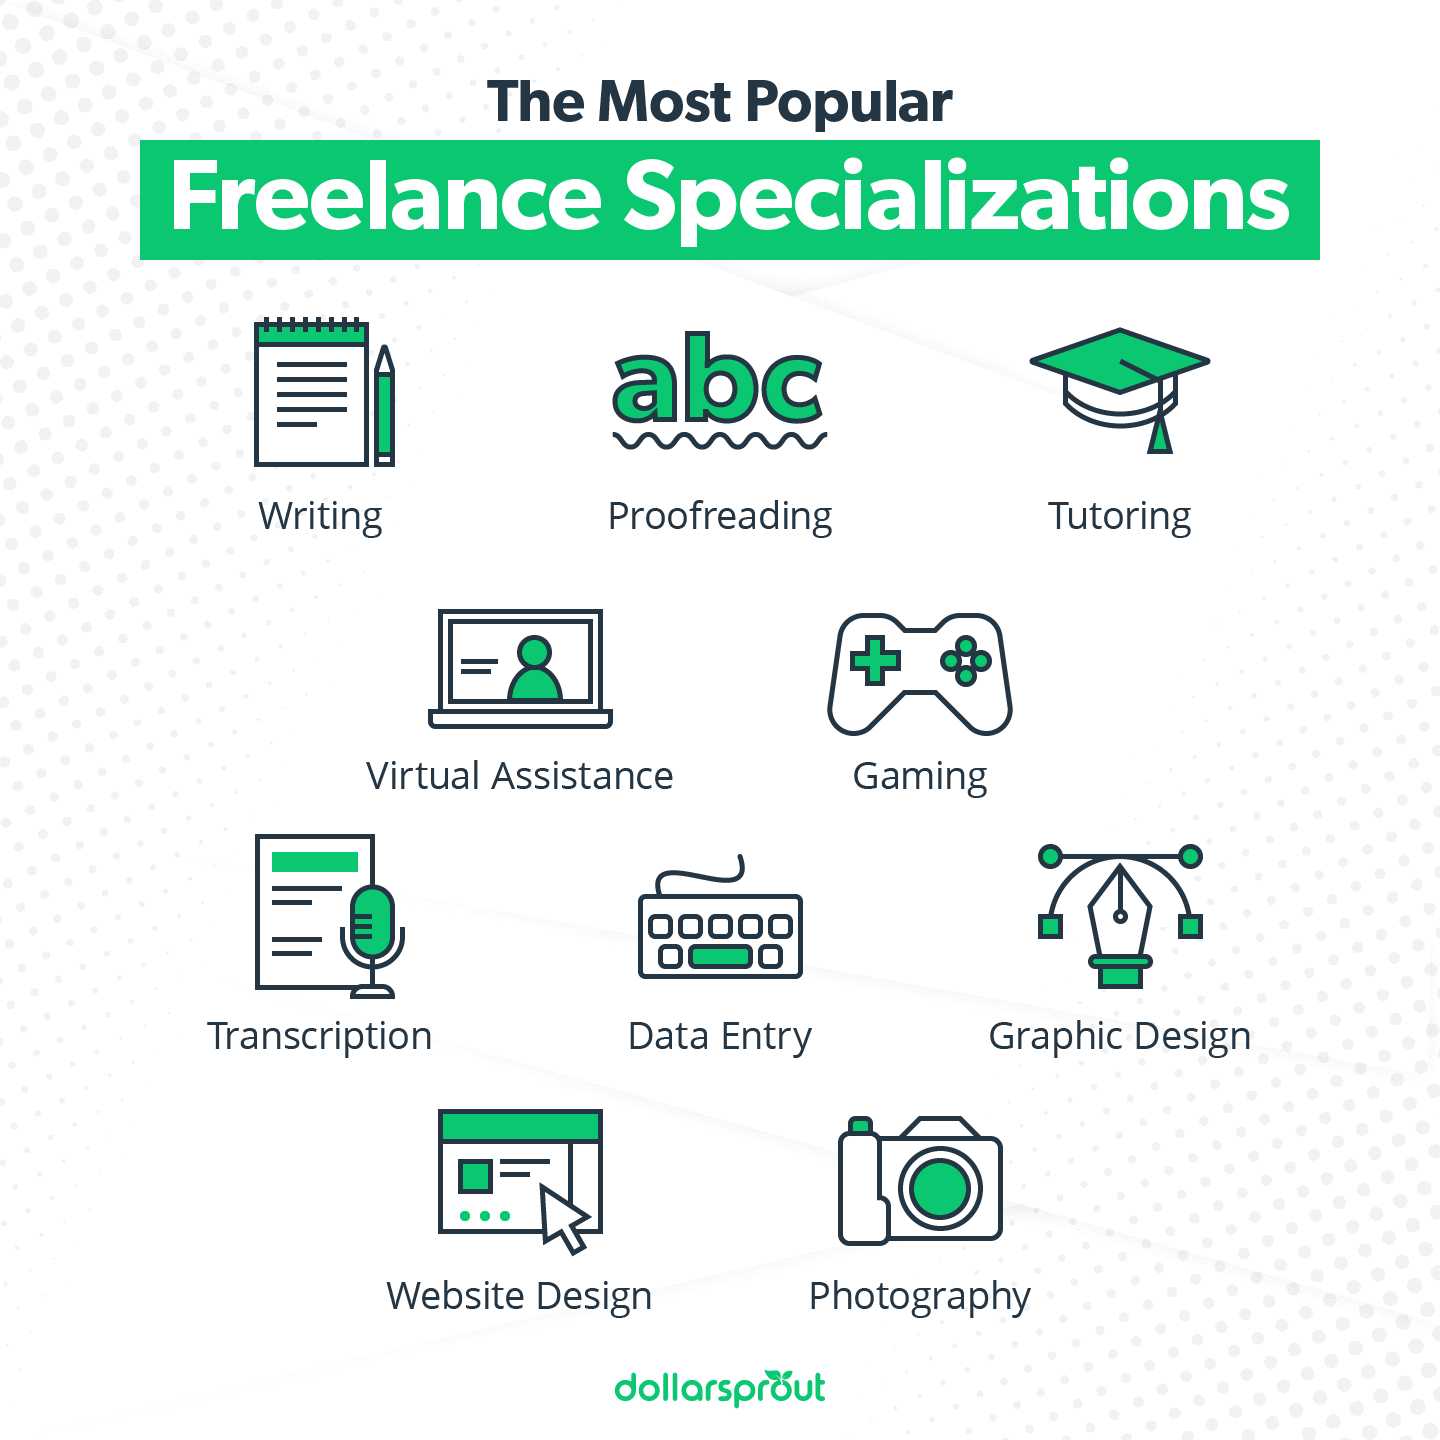 The Most Popular Freelance Specializations